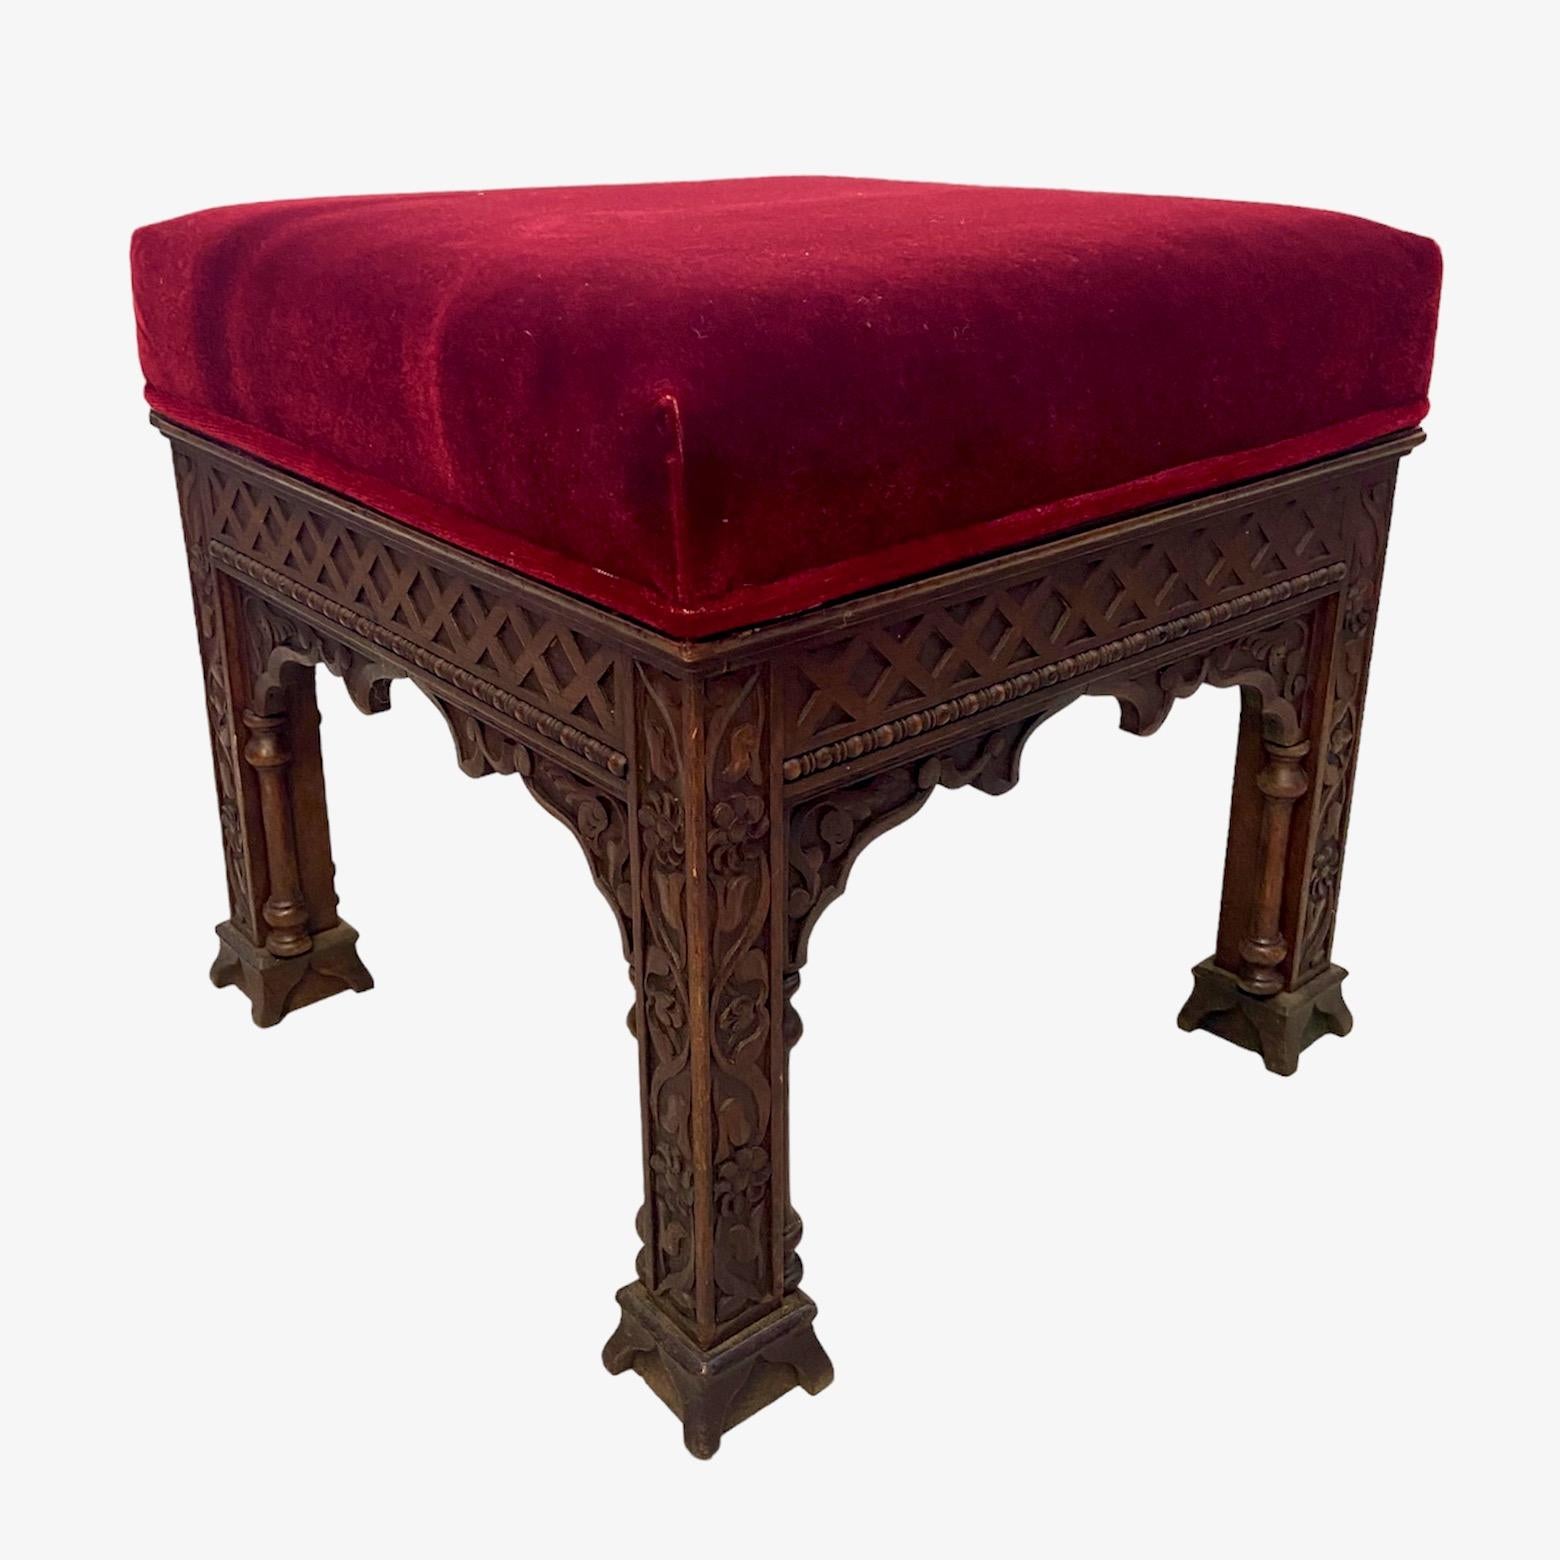 intricate Victorian, Arts and Crafts Moorish Style Stool, possibly Liberty For Sale 1